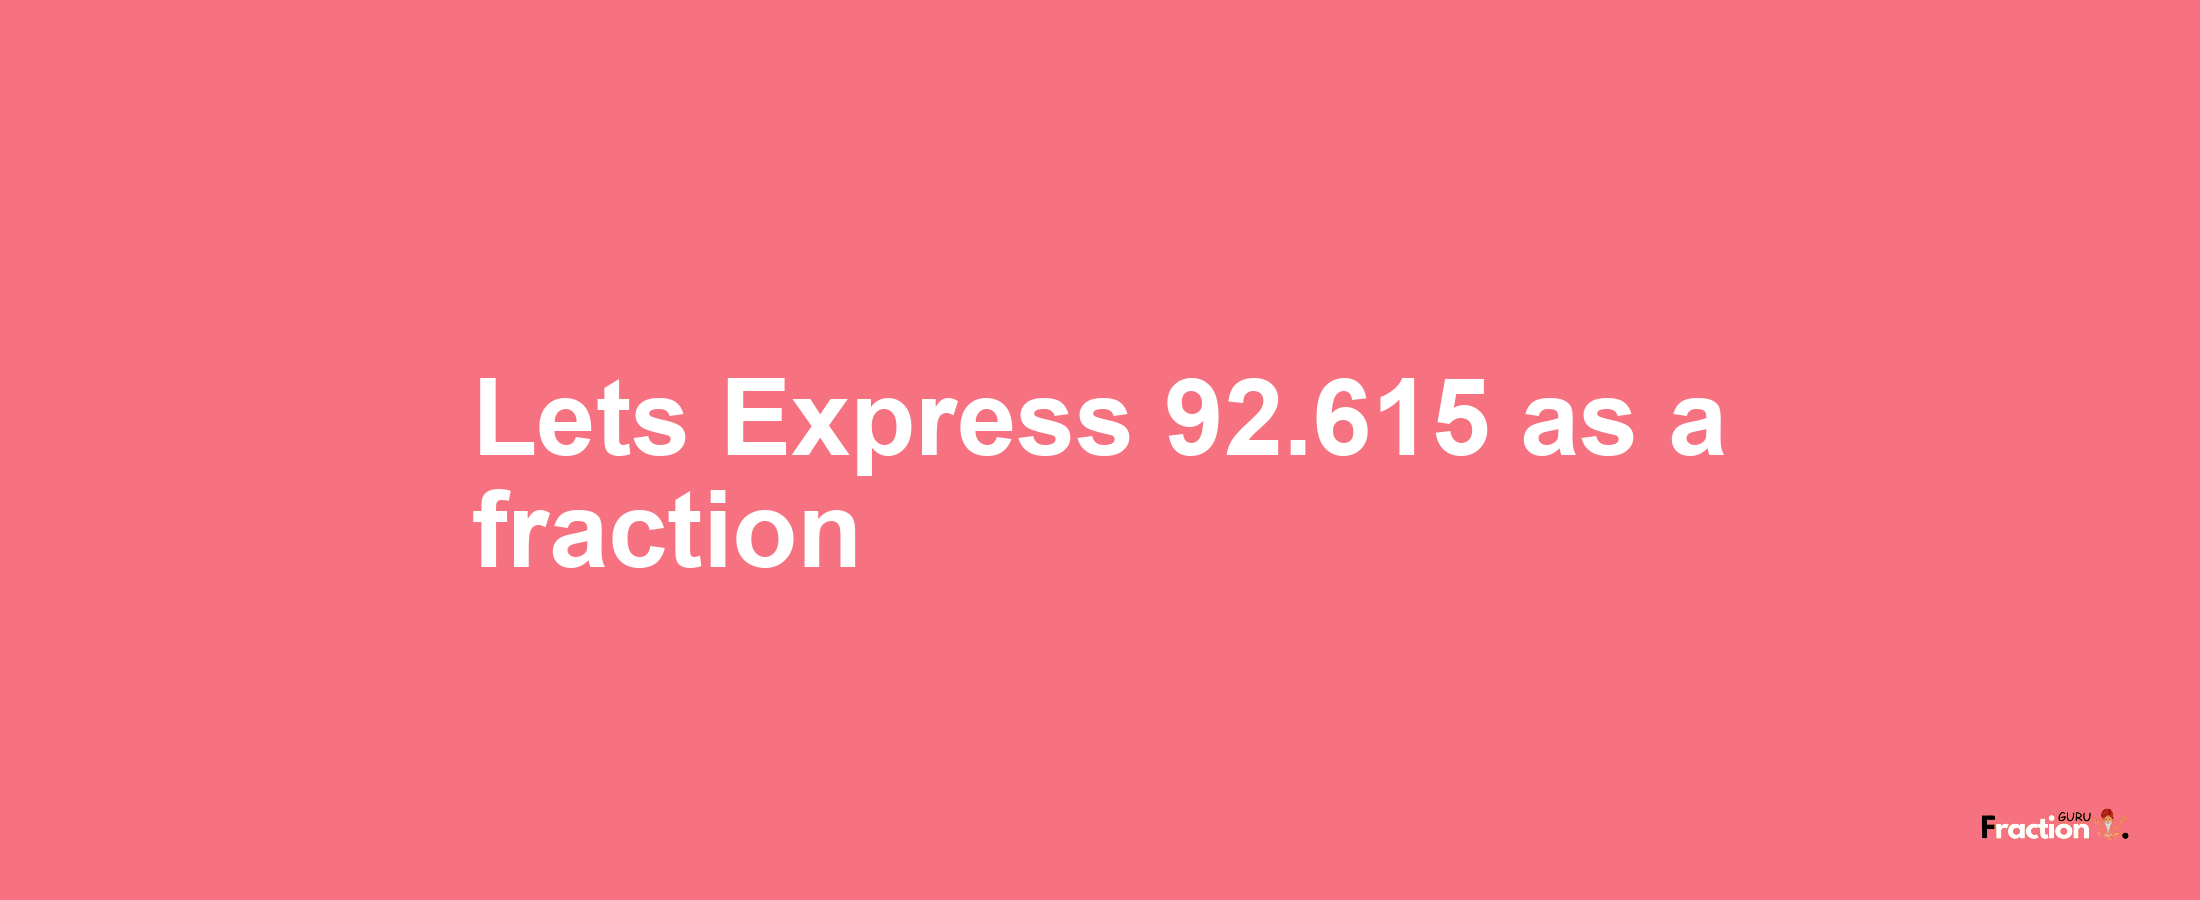 Lets Express 92.615 as afraction